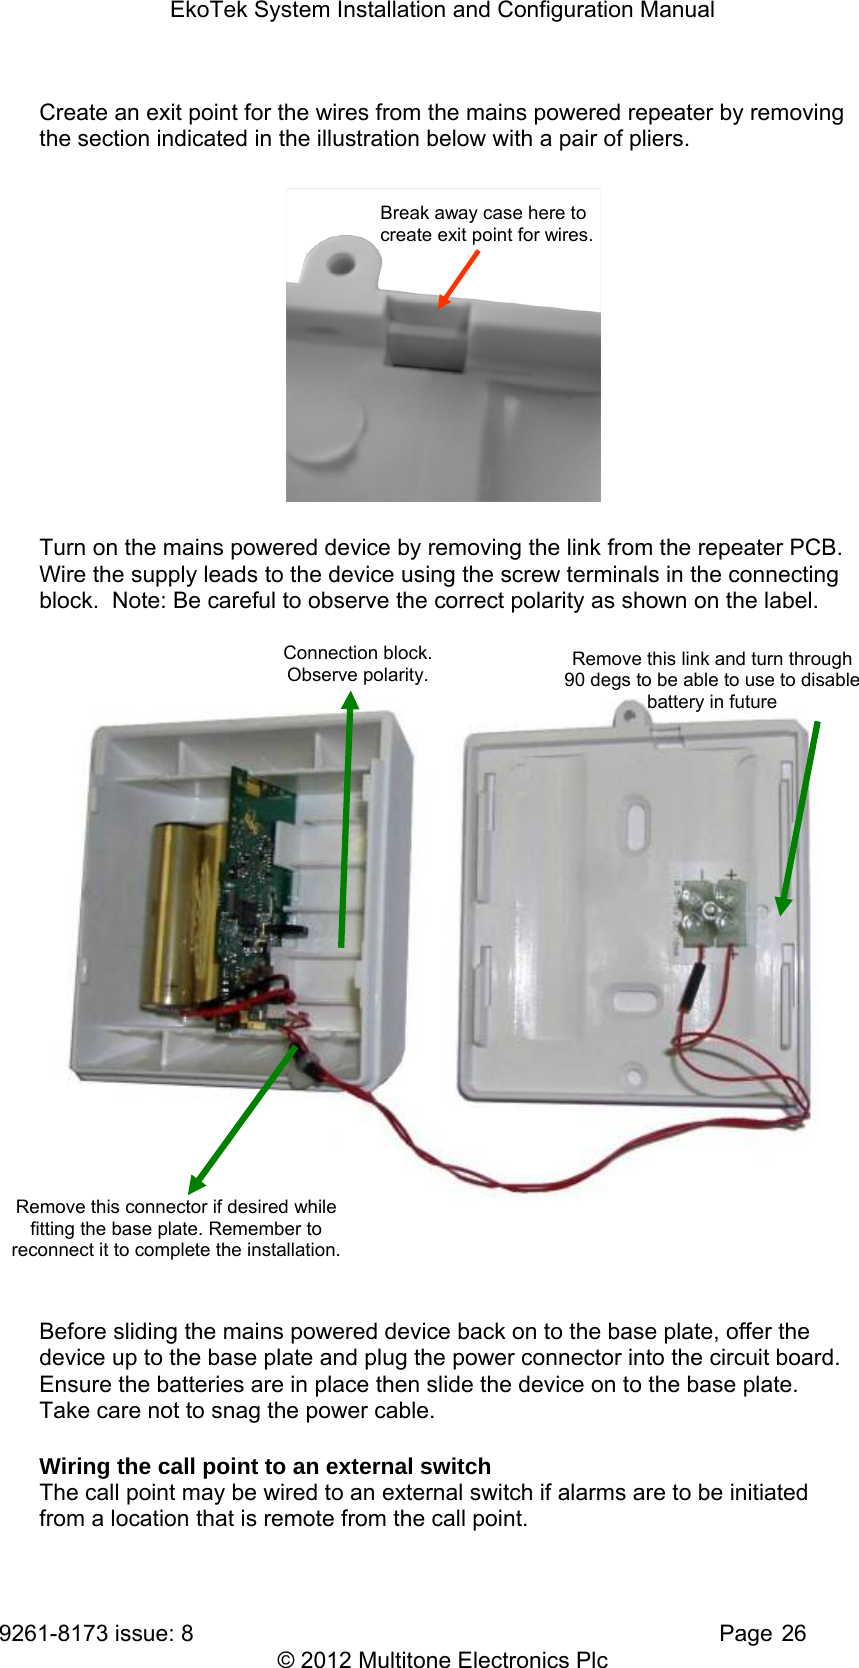 EkoTek System Installation and Configuration Manual 9261-8173 issue: 8   Page 26 © 2012 Multitone Electronics Plc Create an exit point for the wires from the mains powered repeater by removing the section indicated in the illustration below with a pair of pliers. Break away case here to create exit point for wires.  Turn on the mains powered device by removing the link from the repeater PCB.  Wire the supply leads to the device using the screw terminals in the connecting block.  Note: Be careful to observe the correct polarity as shown on the label.          Before sliding the mains powered device back on to the base plate, offer the device up to the base plate and plug the power connector into the circuit board.  Ensure the batteries are in place then slide the device on to the base plate.  Take care not to snag the power cable. Wiring the call point to an external switch The call point may be wired to an external switch if alarms are to be initiated from a location that is remote from the call point. Remove this connector if desired while fitting the base plate. Remember to reconnect it to complete the installation. Connection block.   Observe polarity.  Remove this link and turn through 90 degs to be able to use to disable battery in future 